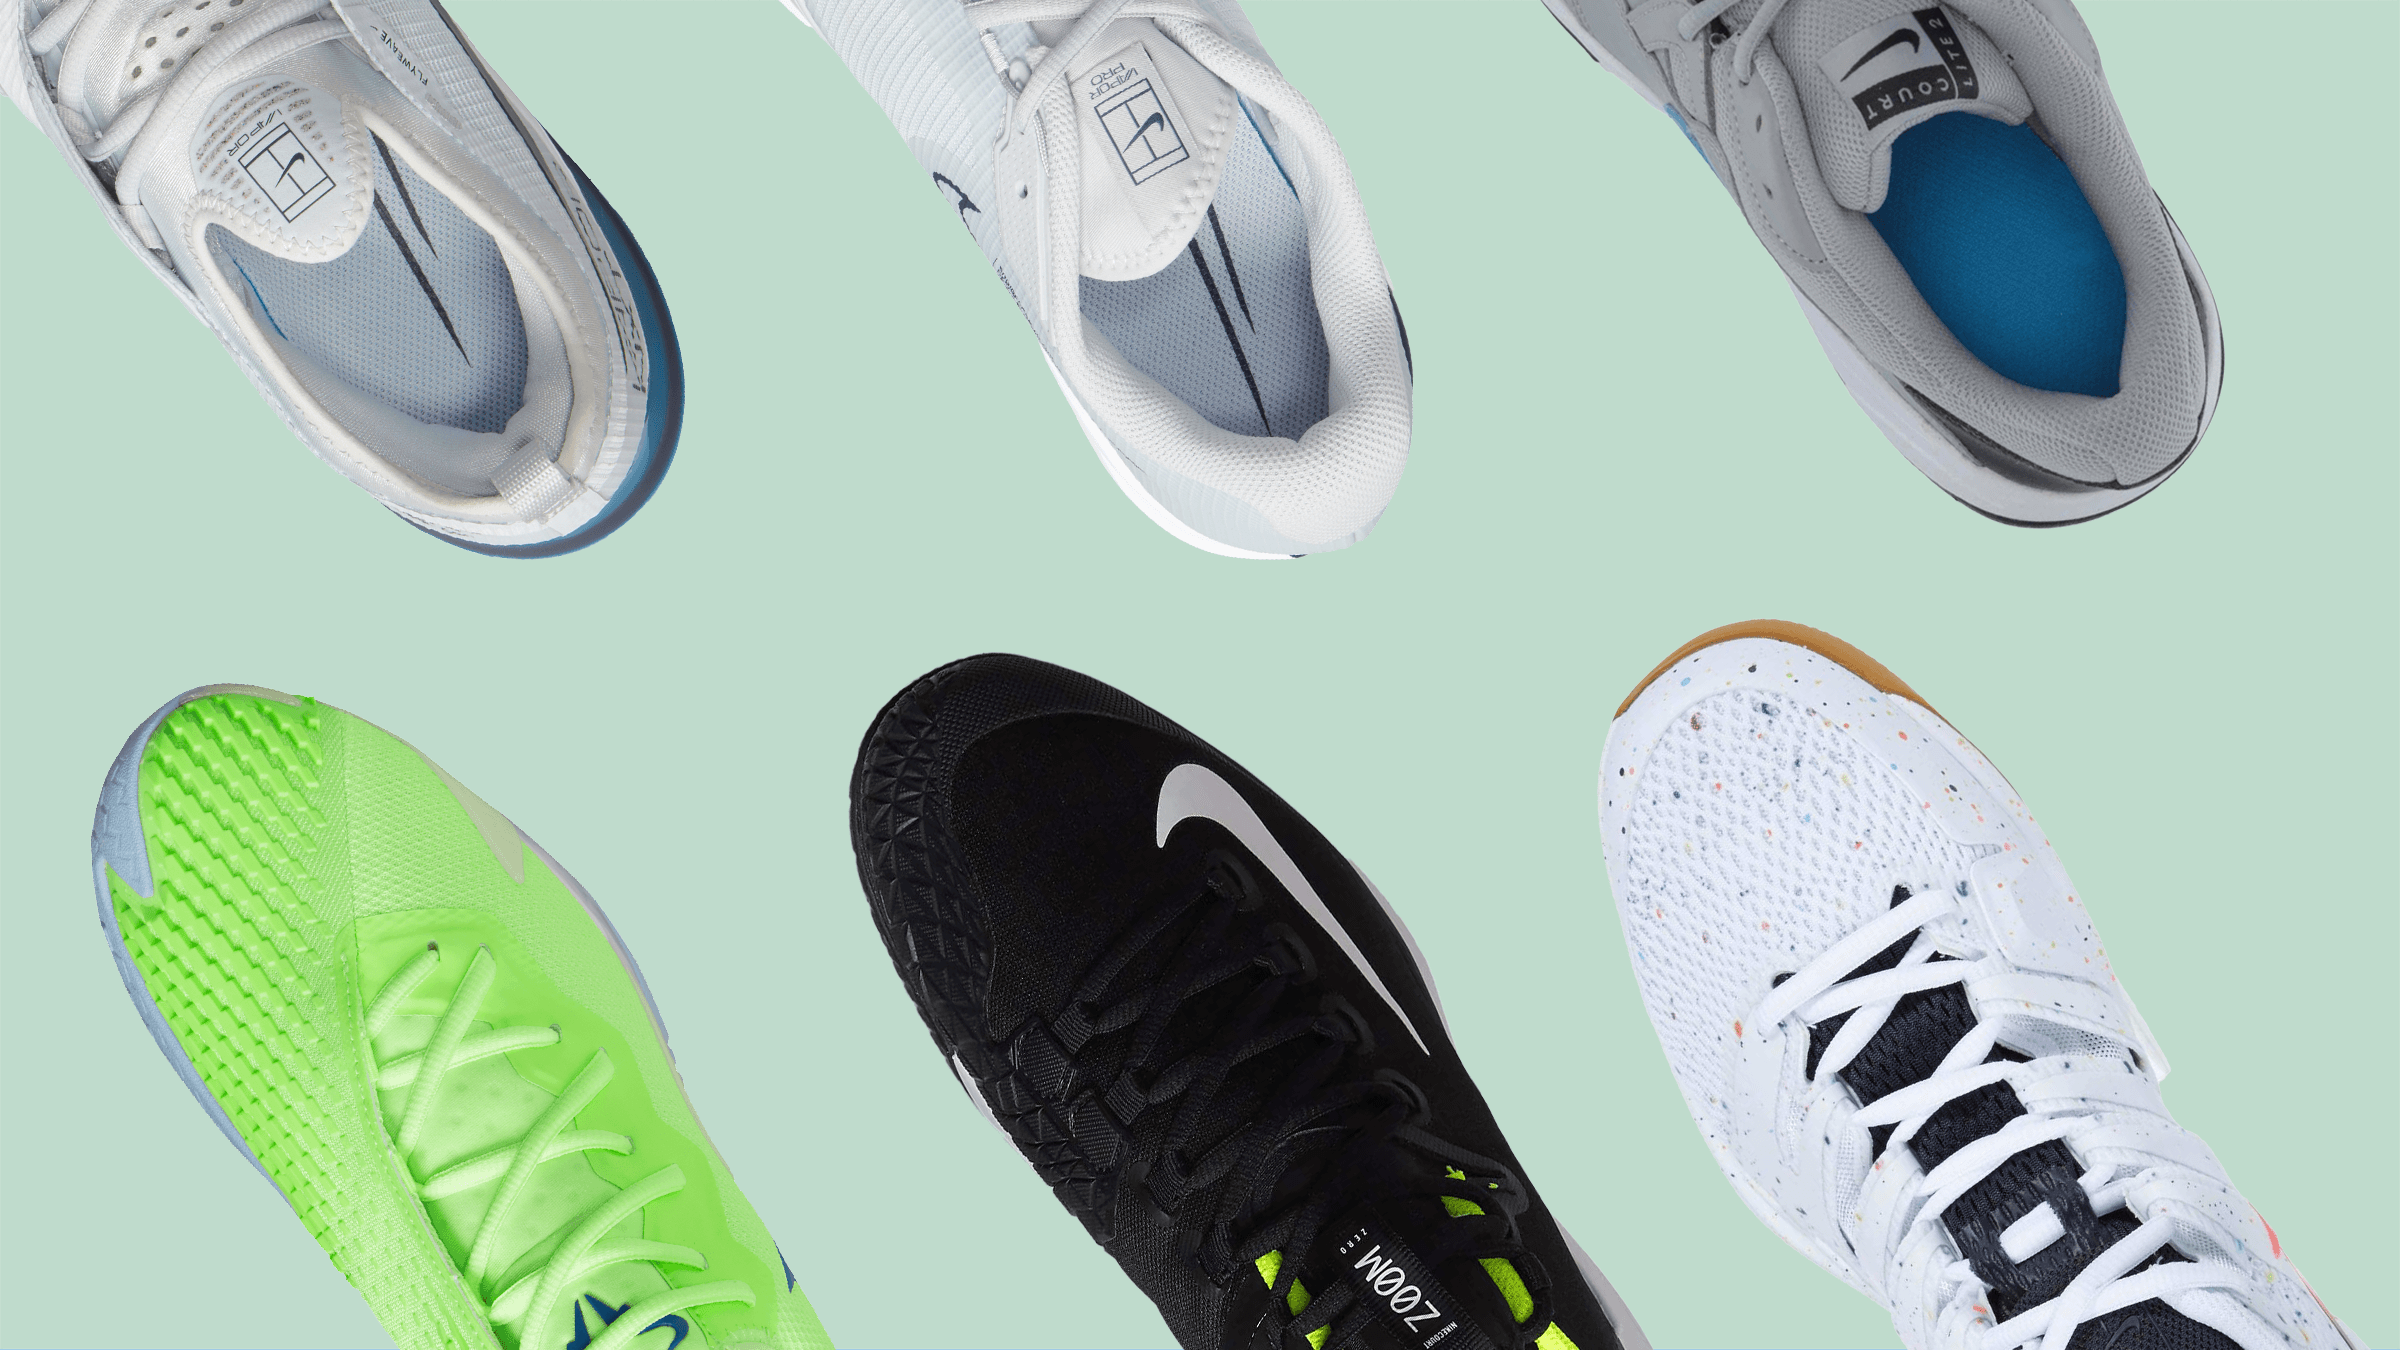 8 Best Nike Tennis Shoes For Men in 2022